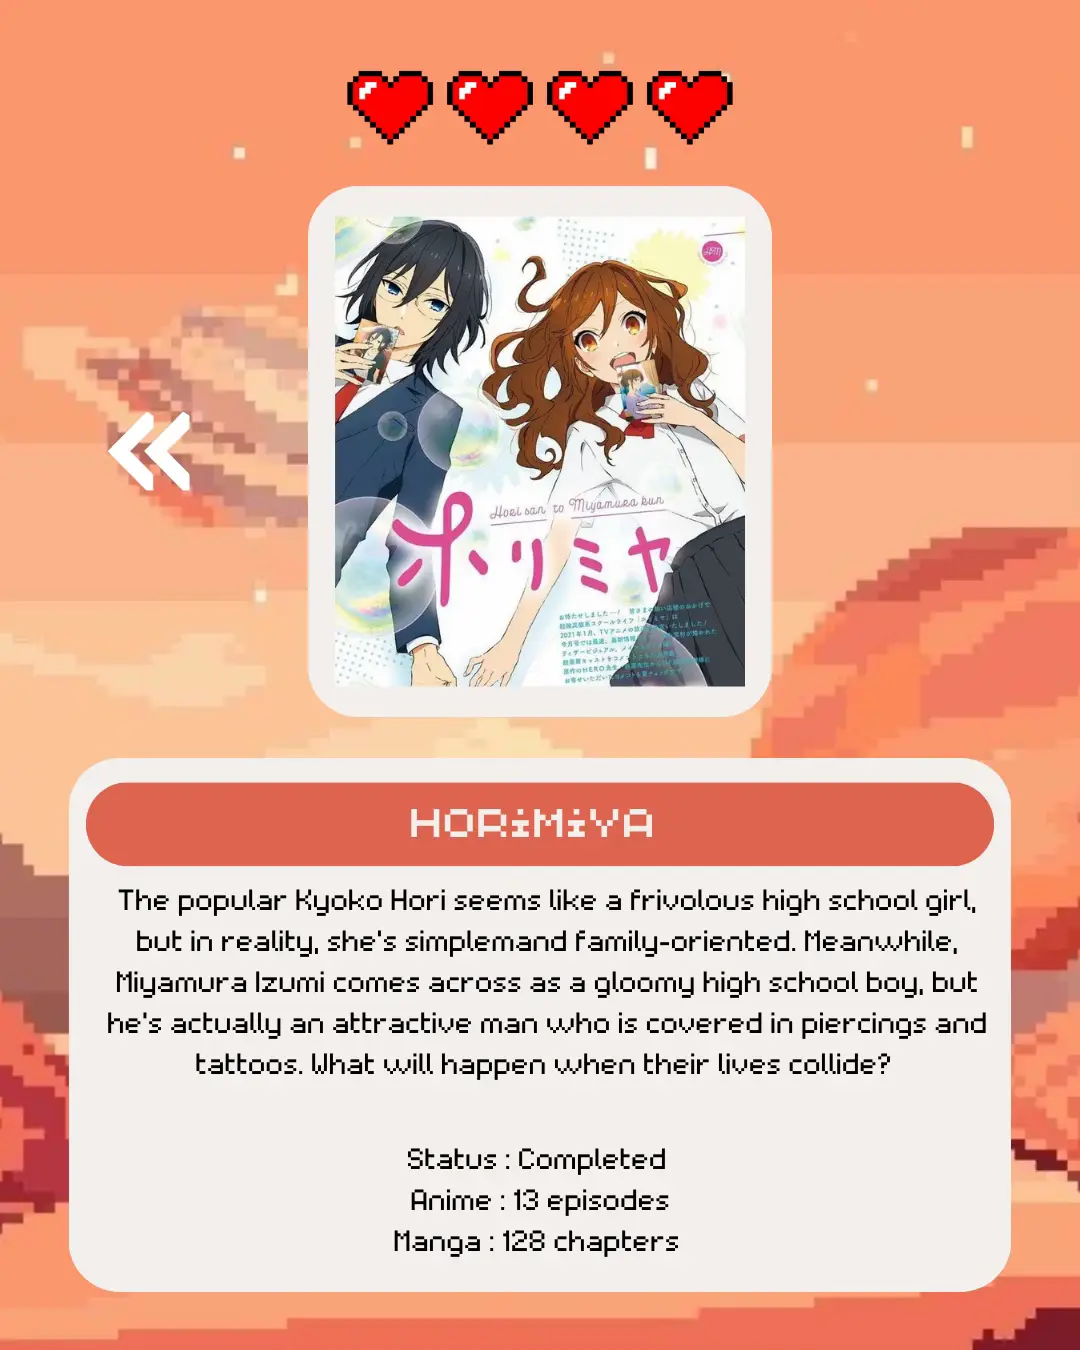 Horimiya review: Best romance anime ever or overrated high school